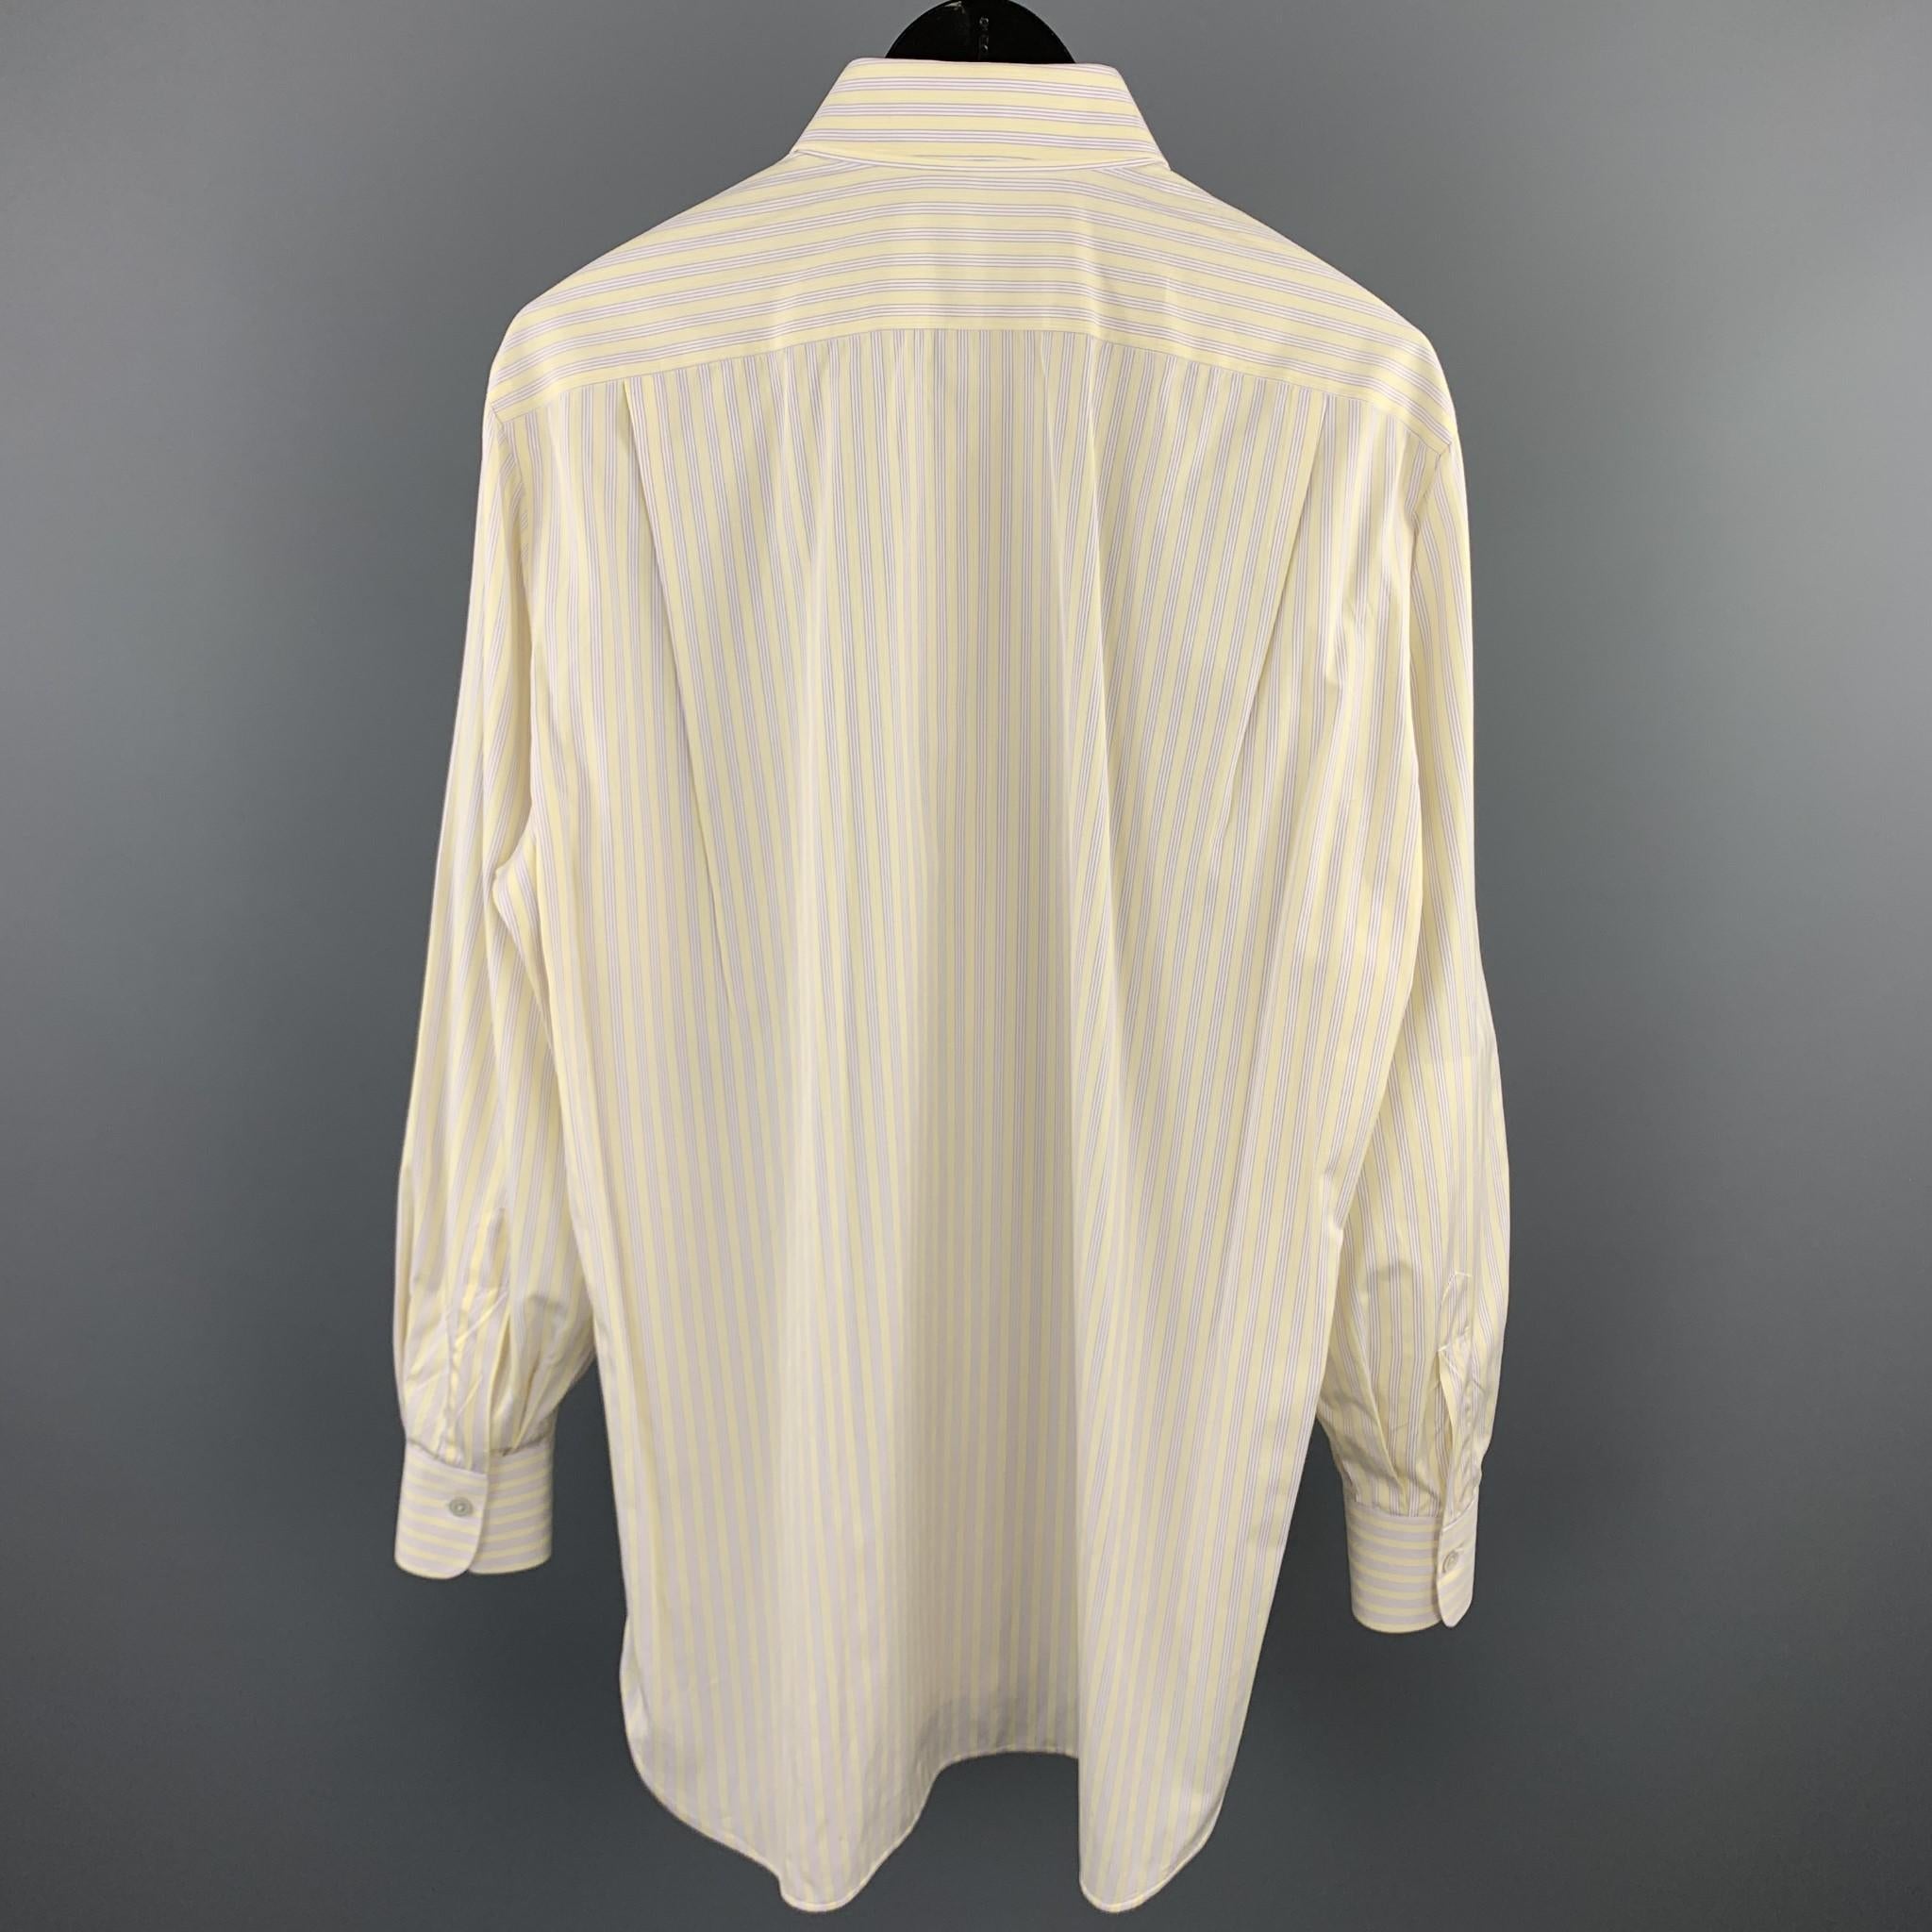 KITON long sleeve shirt comes in a yellow & purple stripe cotton featuring a button up style and spread collar. Made in Italy.

Excellent Pre-Owned Condition.
Marked: 40

Measurements:

Shoulder: 17 in. 
Chest: 43 in. 
Sleeve: 25 in. 
Length: 33.5